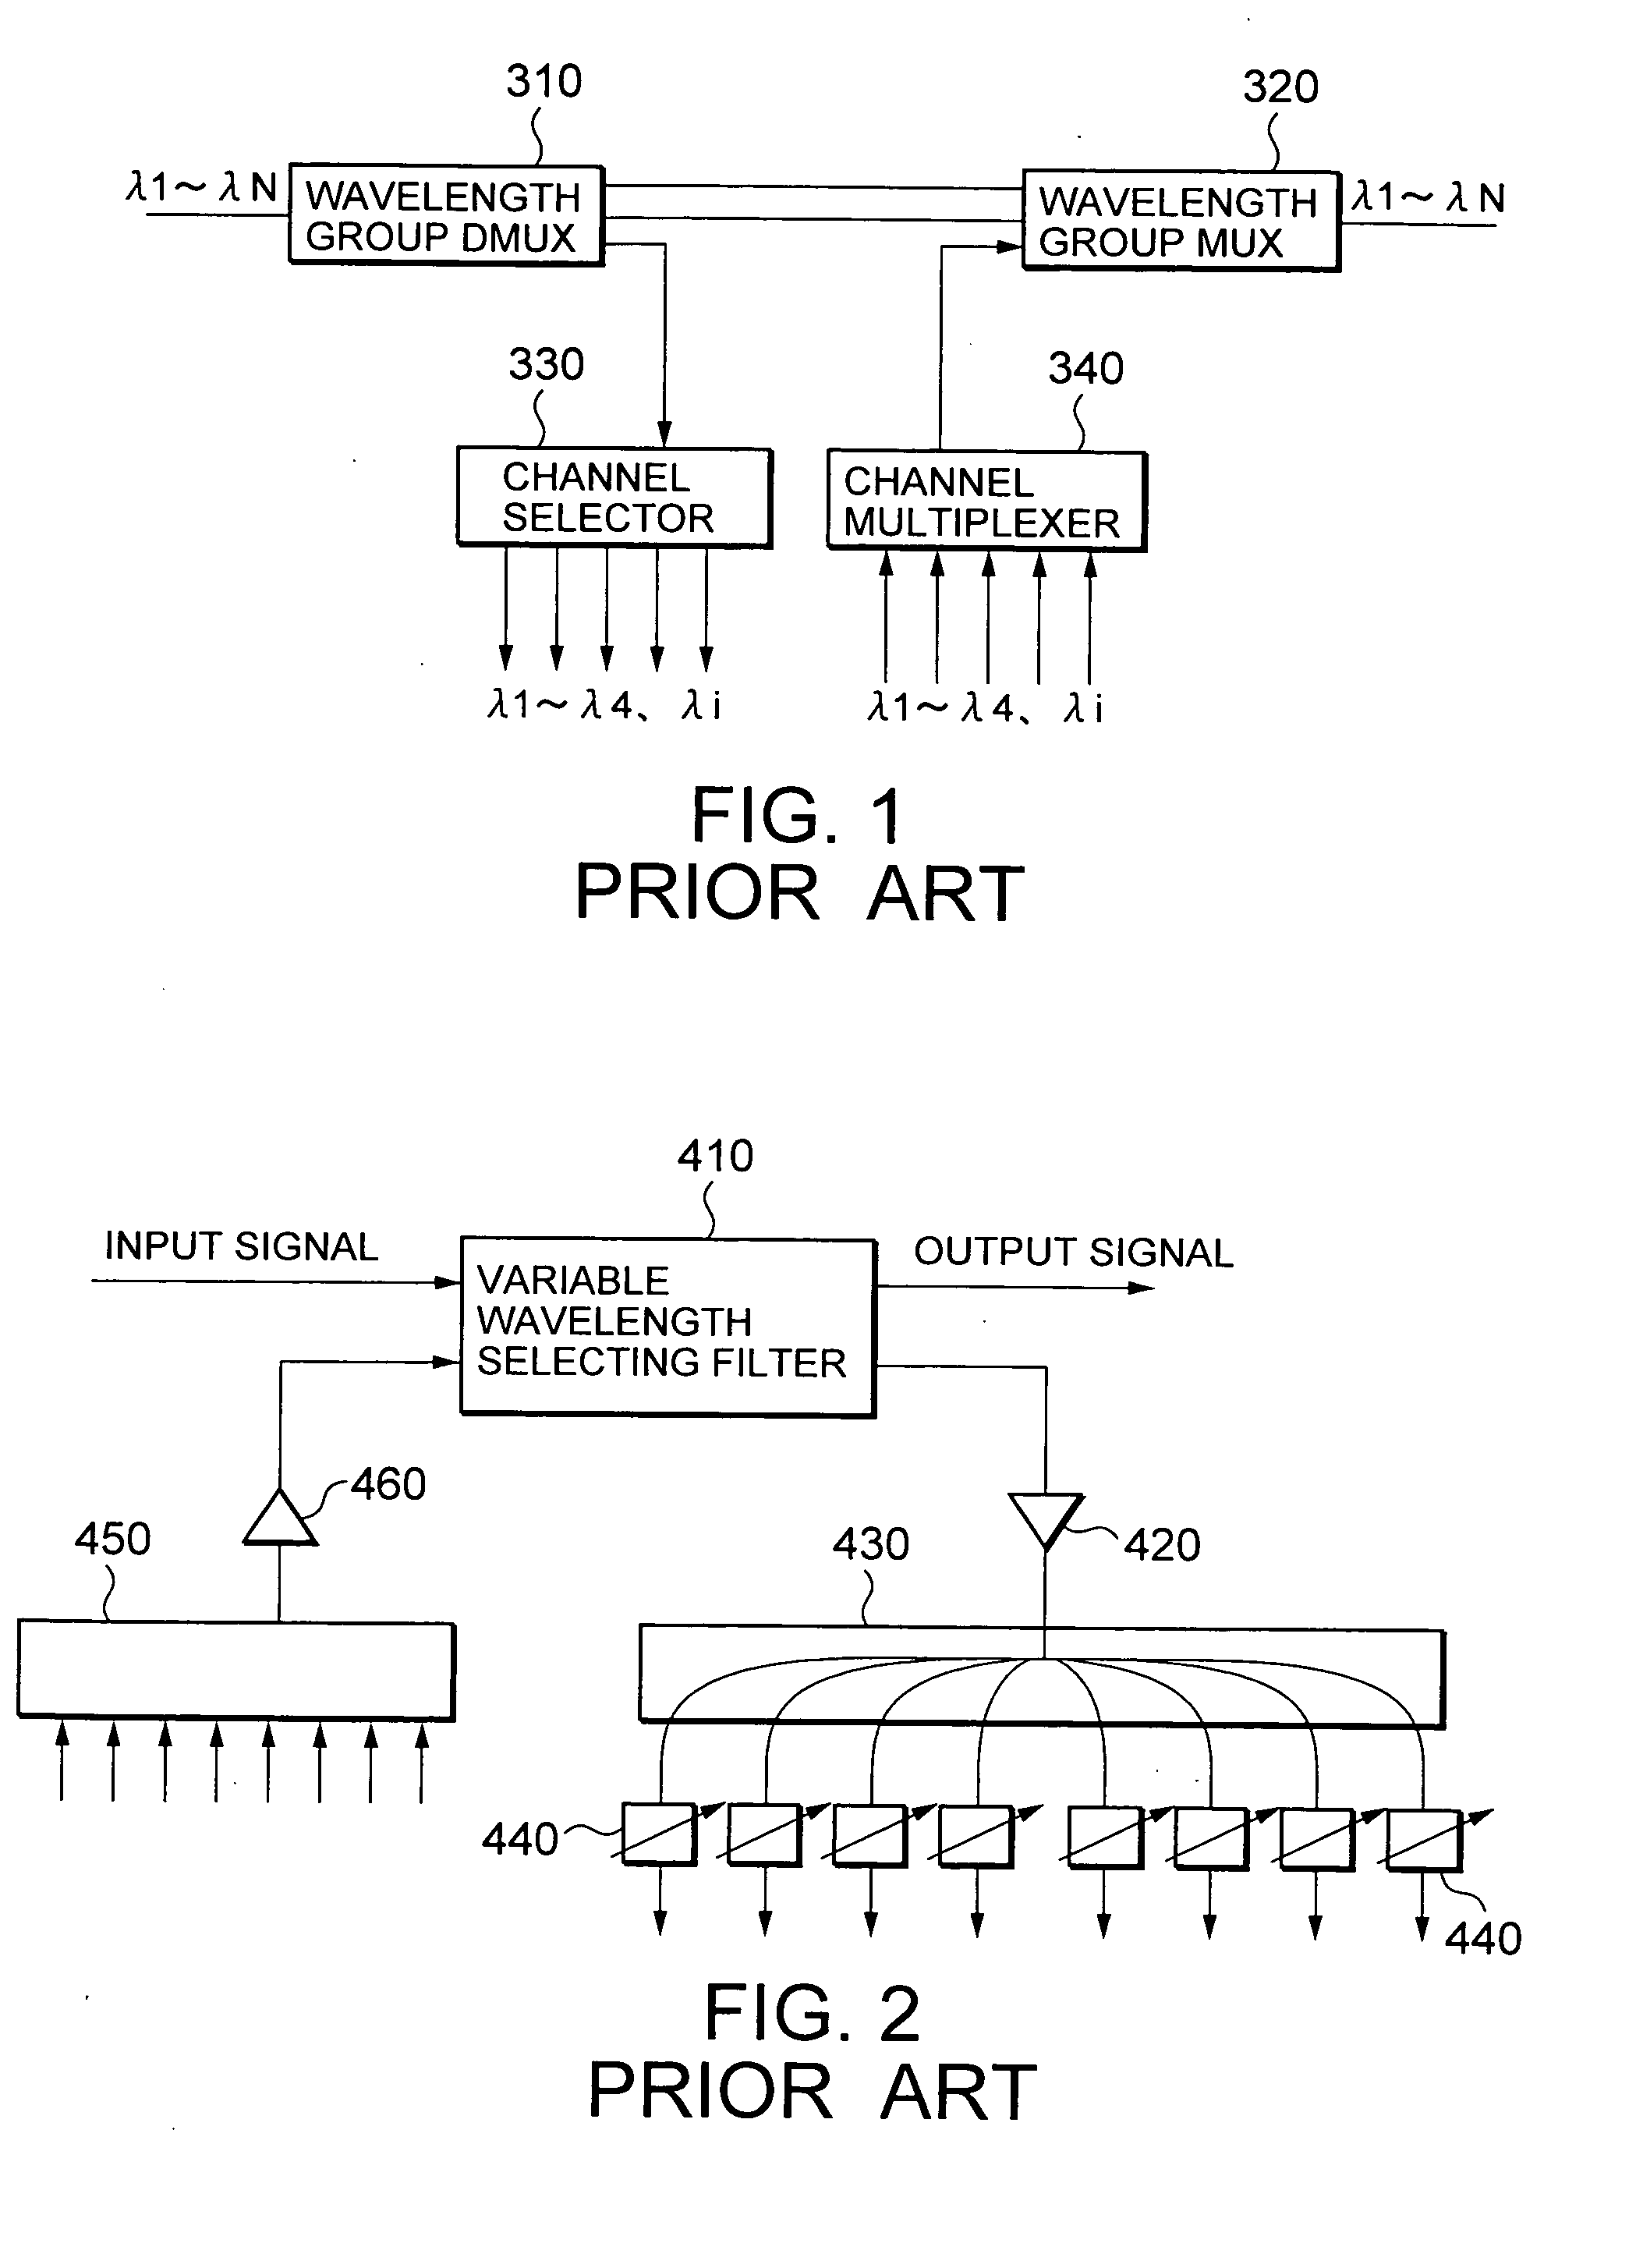 Optical add-drop apparatus and method